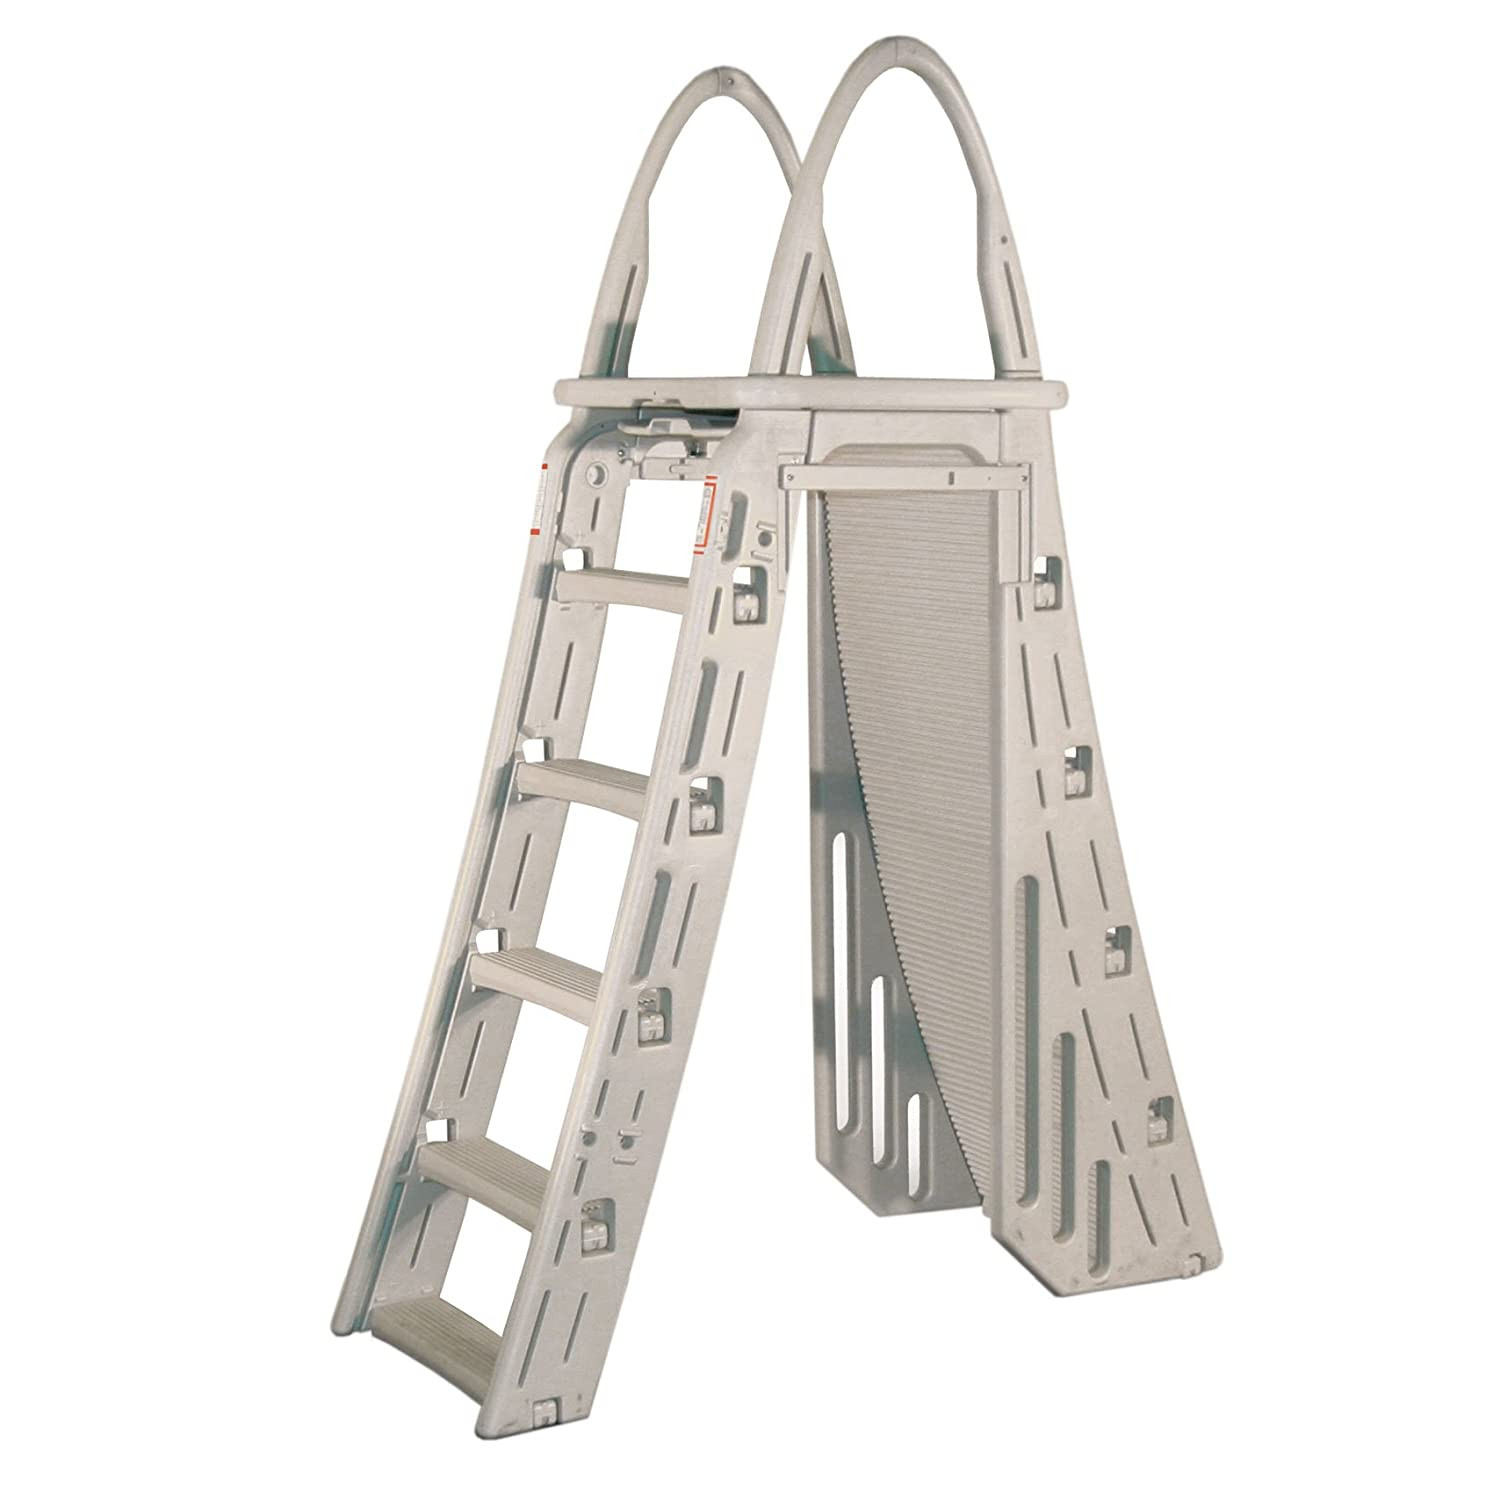 Above Ground Pool Ladder Steps
 Best Ground Pool Ladders and Staircases Reviews 2019